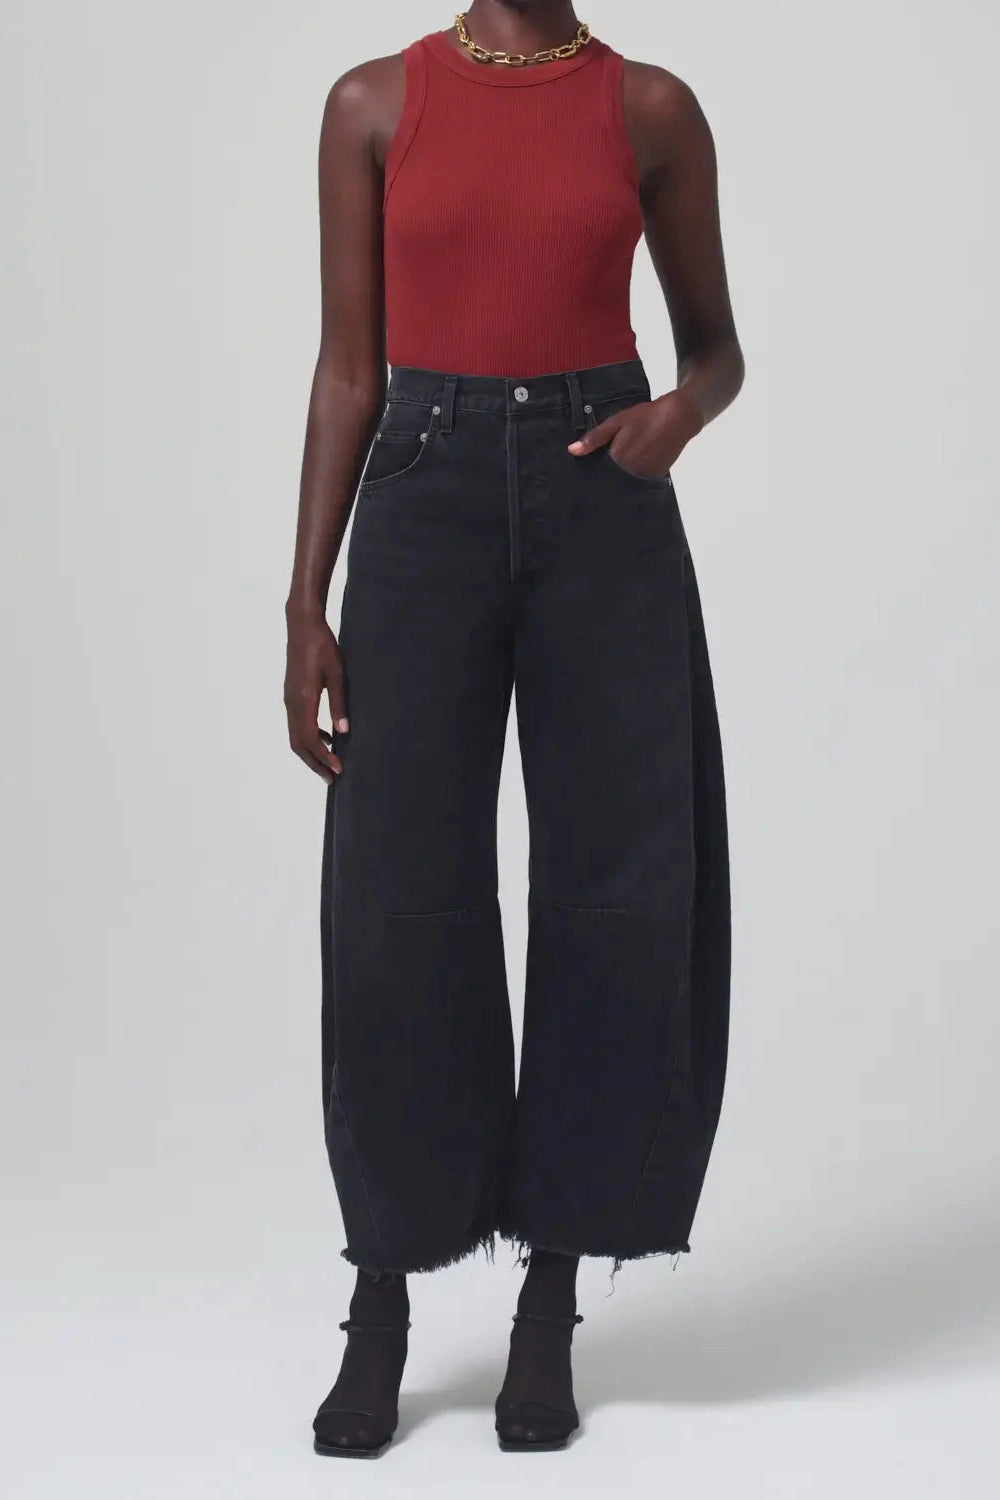 CITIZENS OF HUMANITY HORSESHOE JEANS IN SONNET – Big Drop NYC